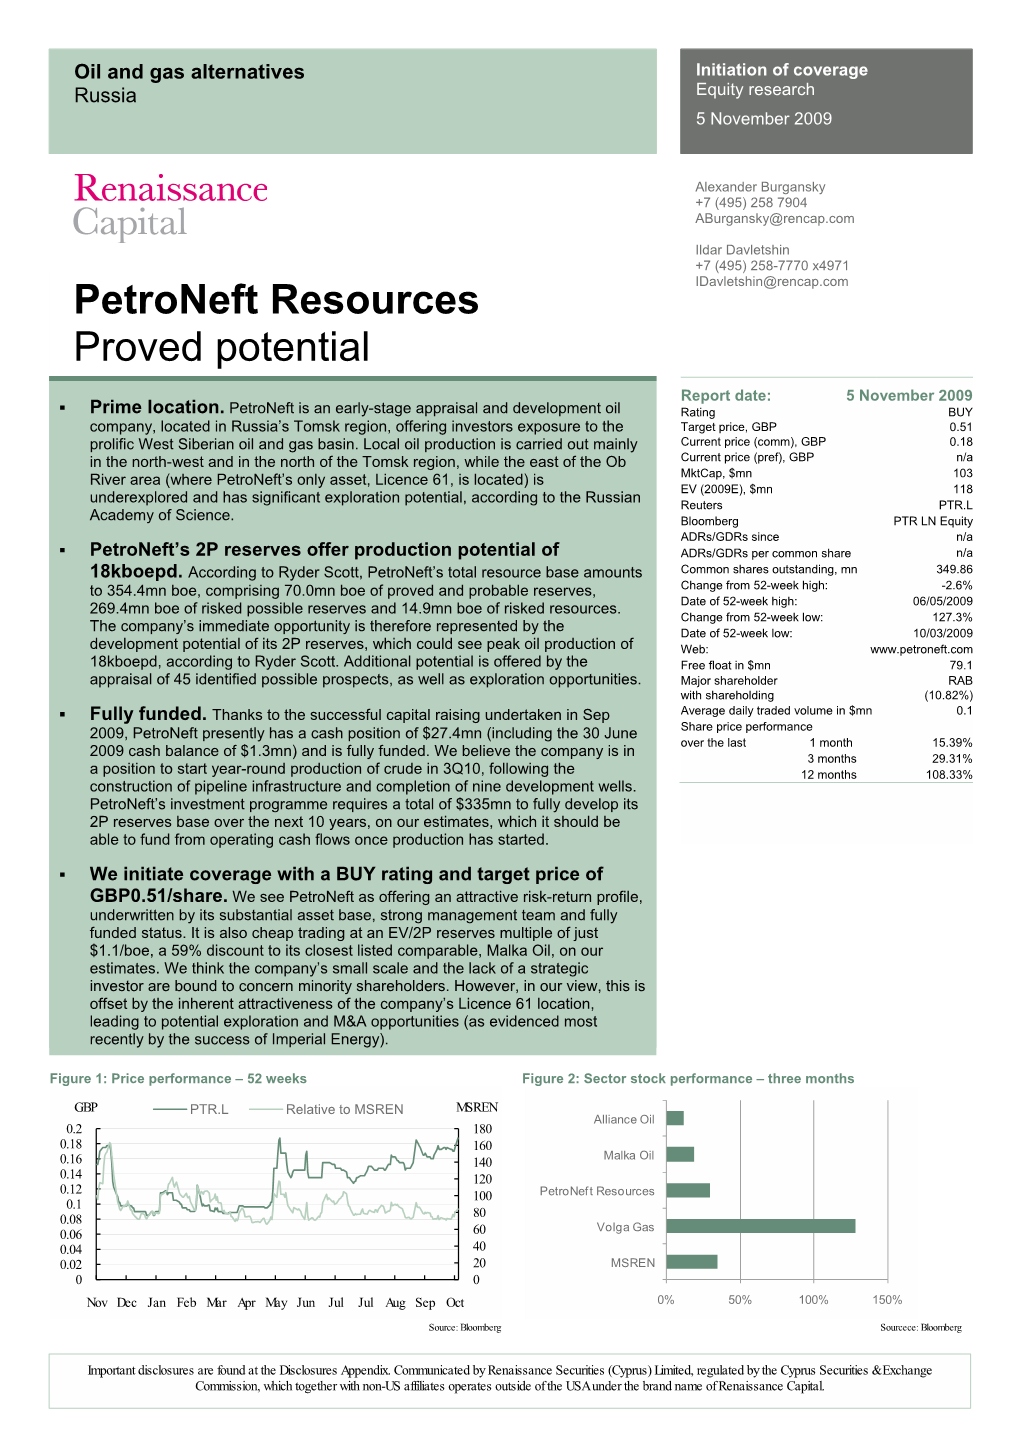 Renaissance Capital Research, Petroneft Resources, Proved